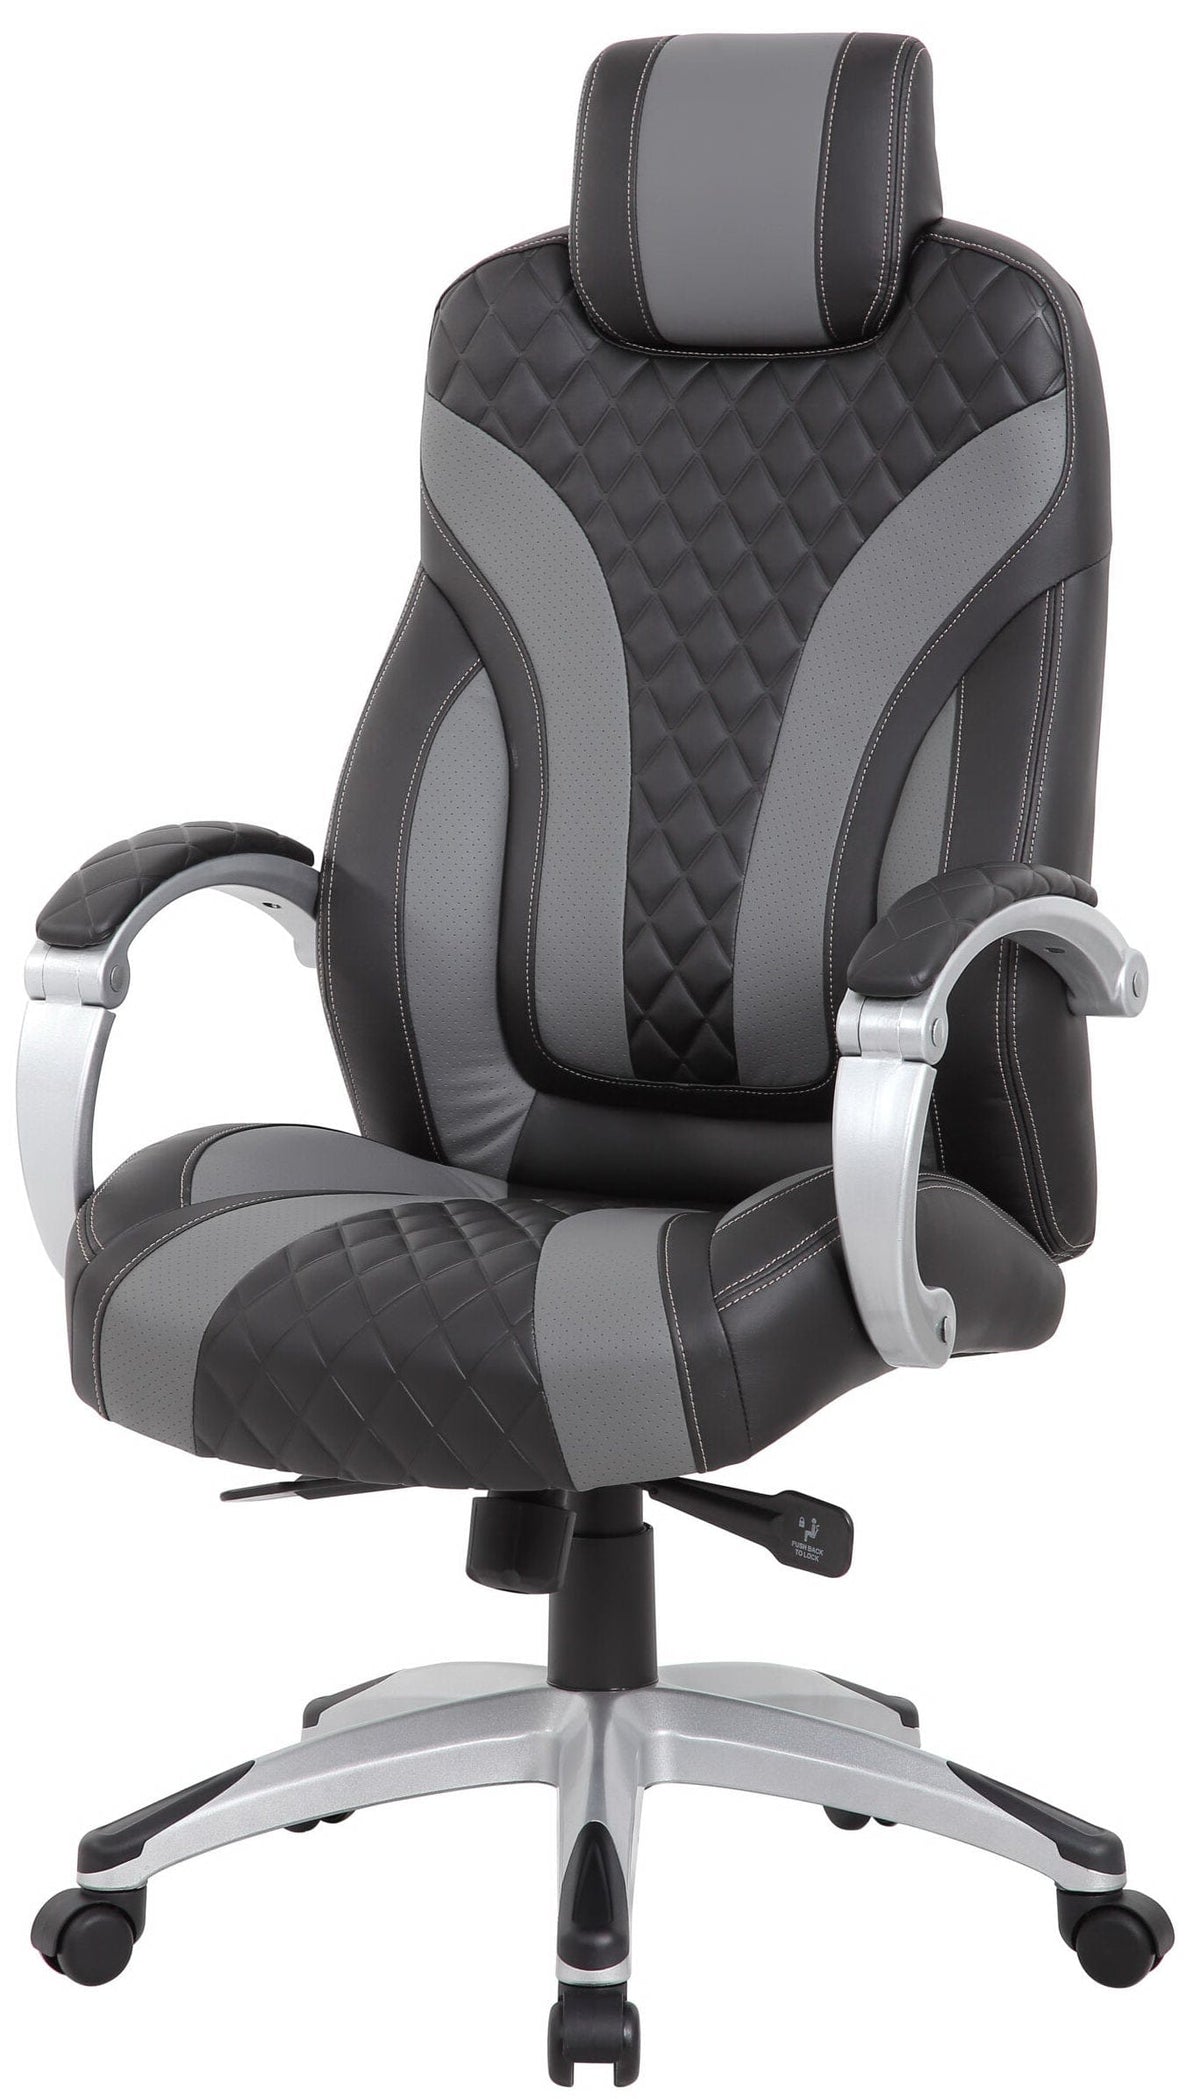 Boss Executive Hinged Arm Chair Black [B8871-BK] Boss Office Products Black/Grey Office Chair B881-BKGY